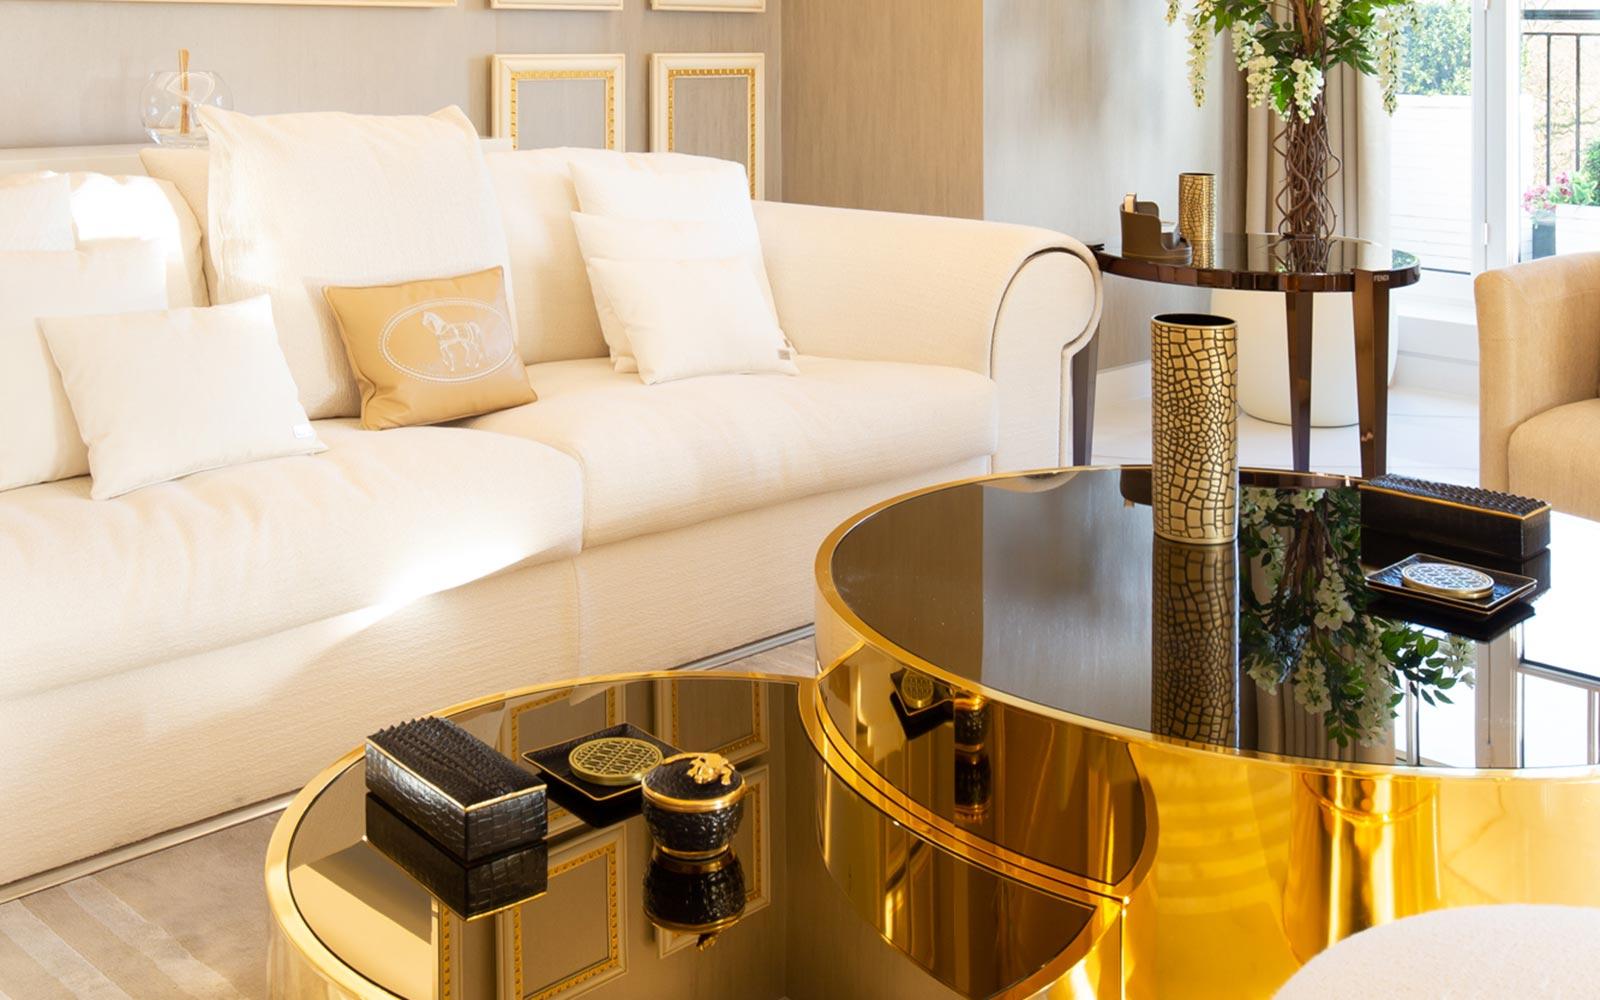 Luxury London’s property of the month - A Fendi designed apartment next to Kensington Palace